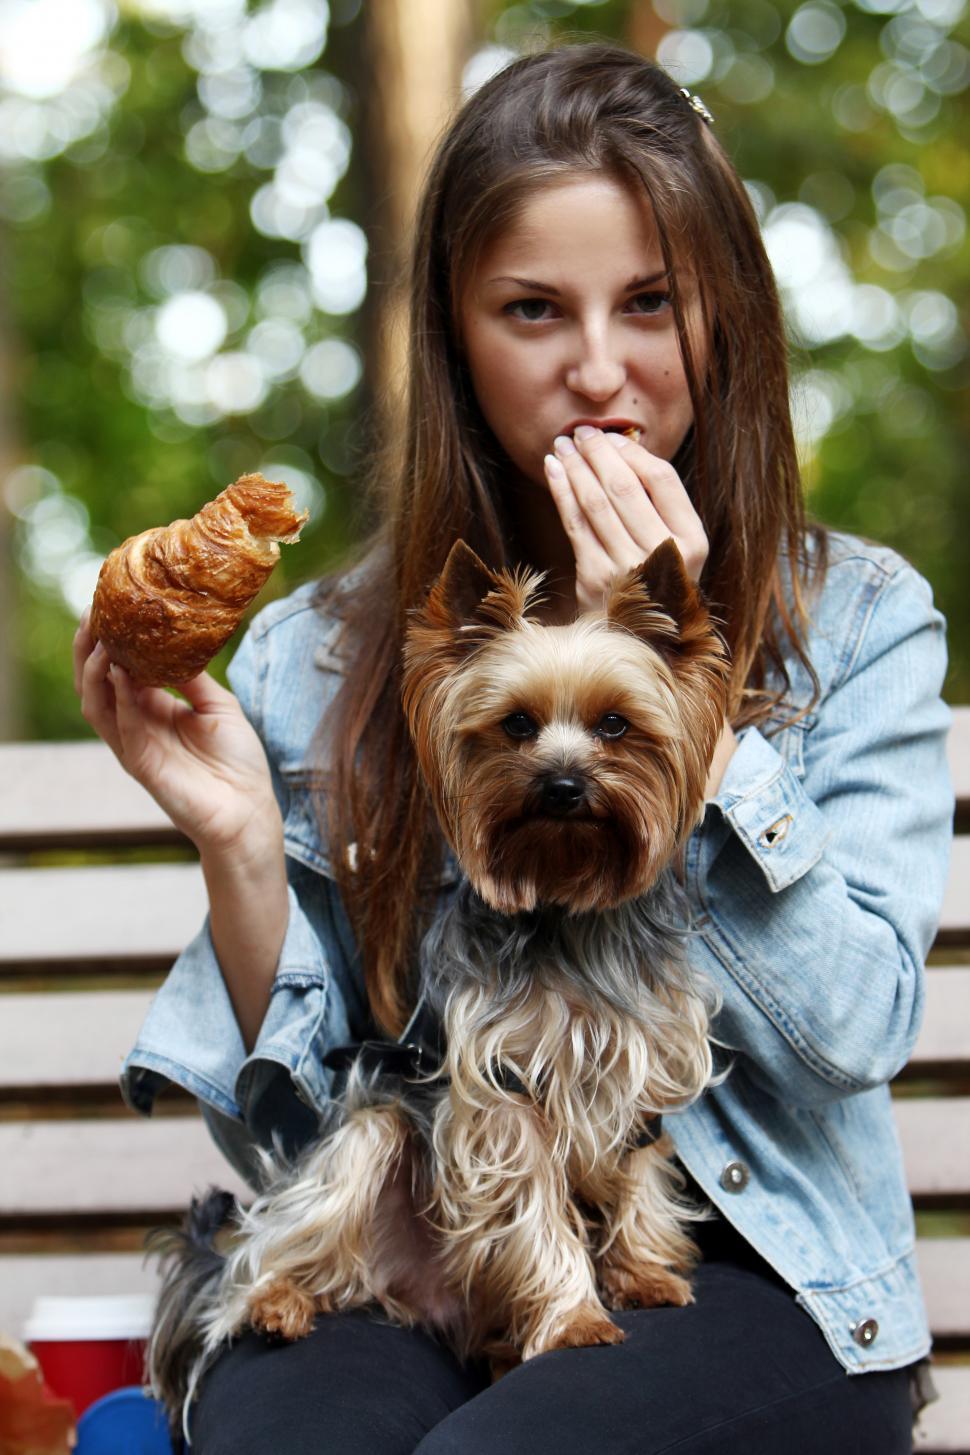 Free Image of Woman eating croissant while sitting with her dog 